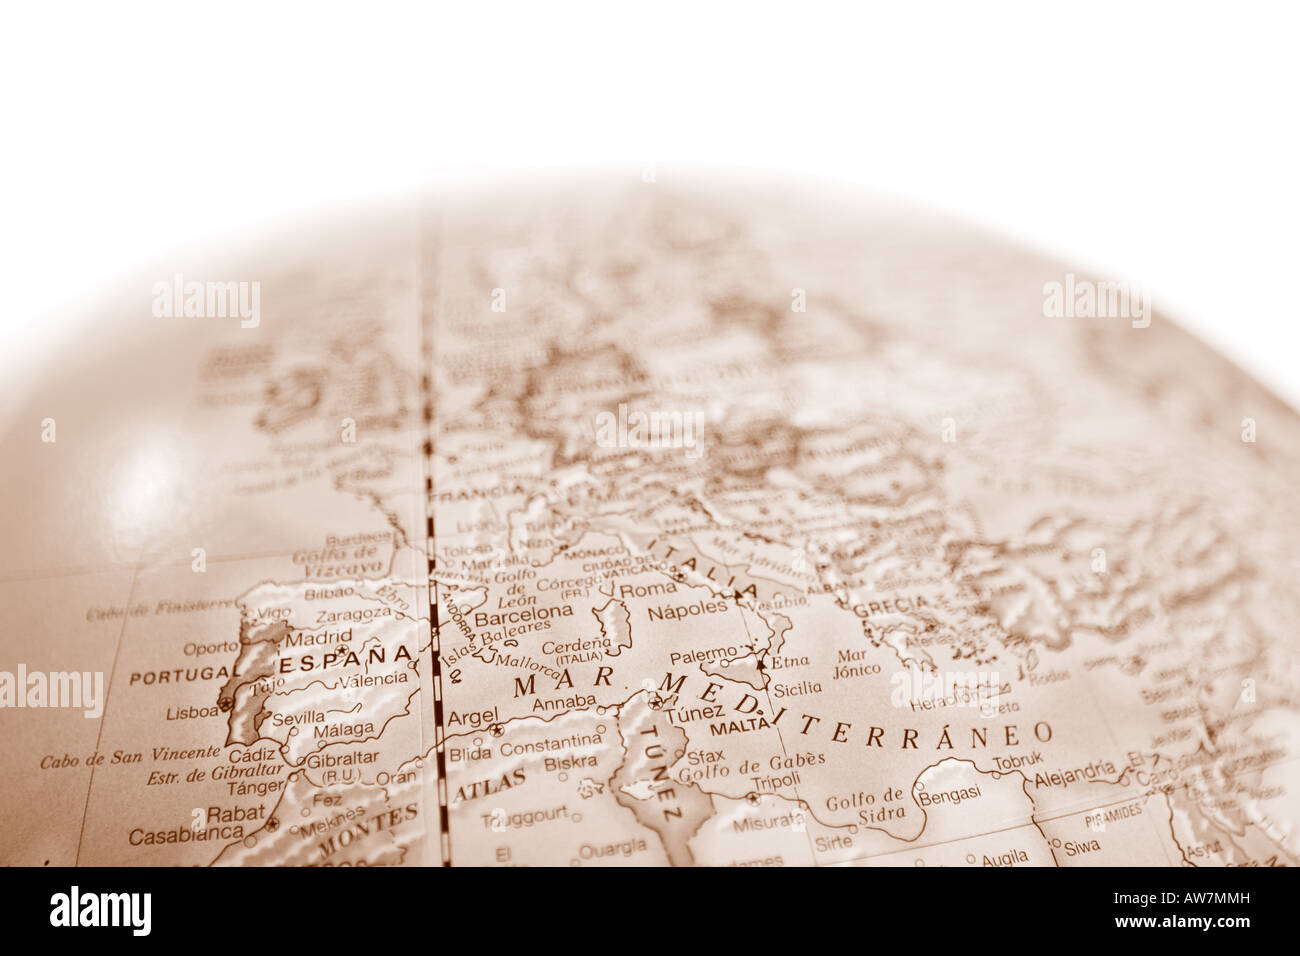 Vintage world map globe with shallow depth of field and focus on the Mediterranean Sea Stock Photo